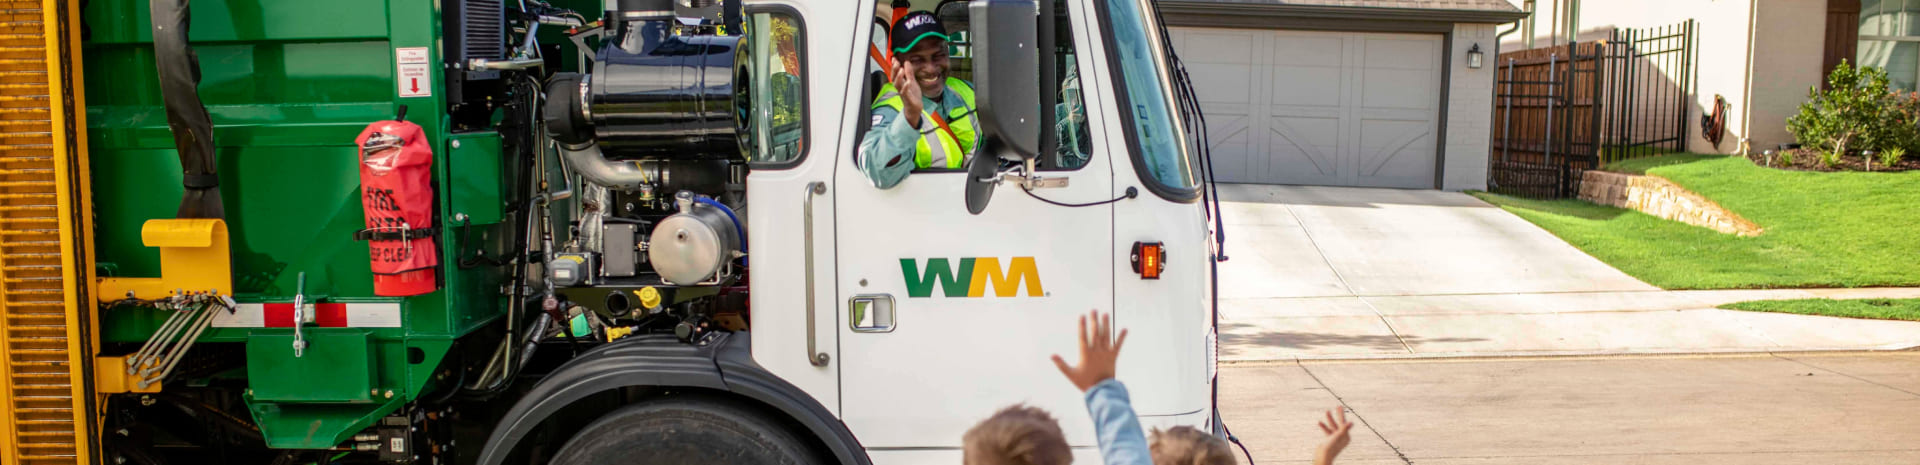 Kids wave to WM truck passing by in residential area